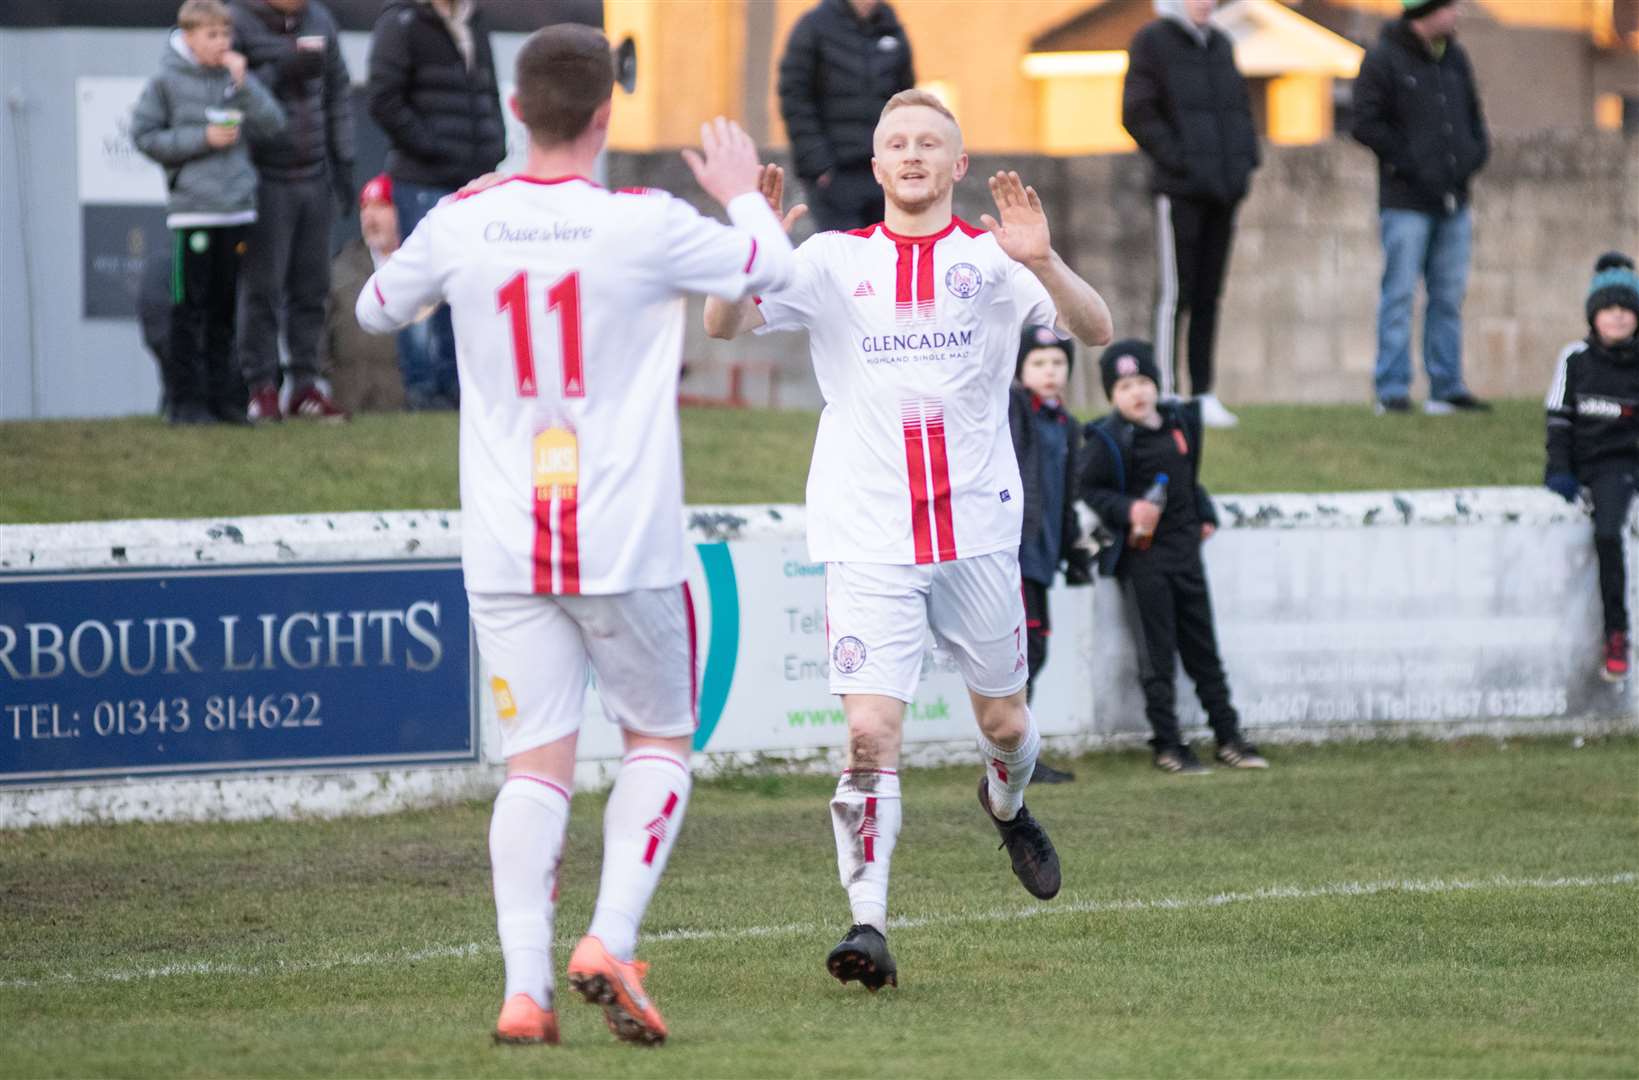 Brechin City are keen to take the season to a final Buckie day decider and seize their chance to return to the SPFL ranks.  Pictured: Daniel Forsyth.